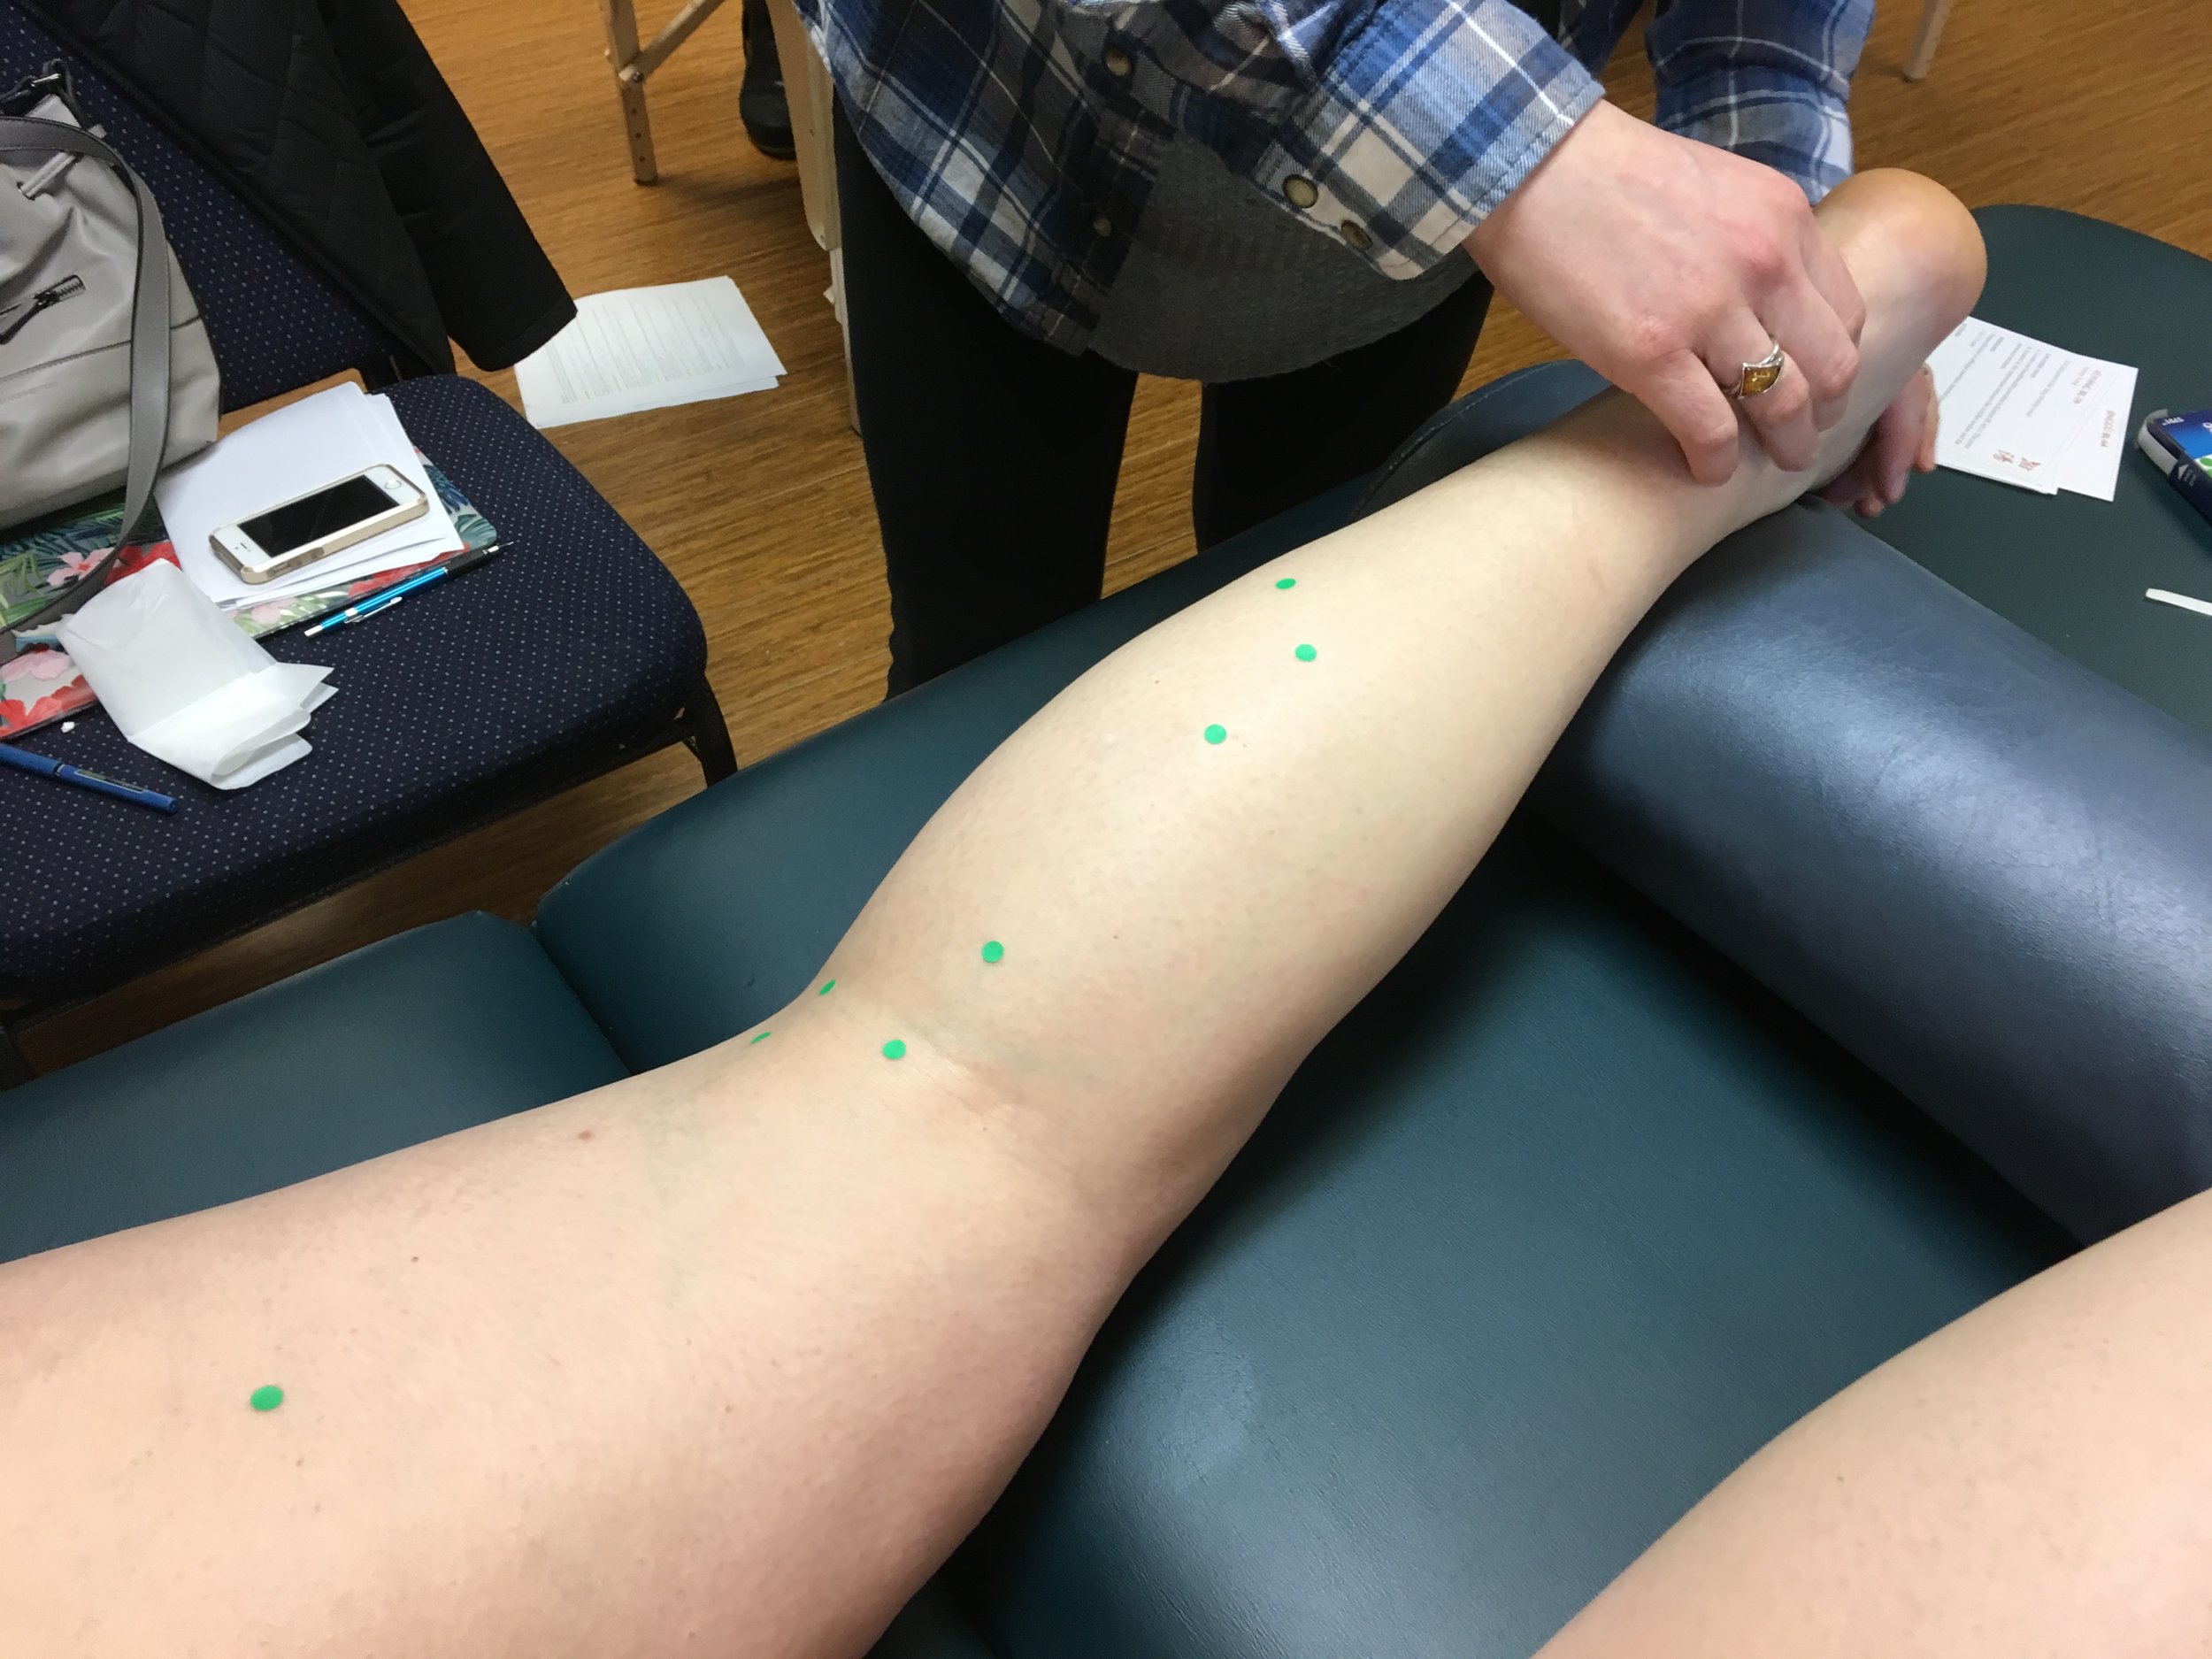 Finding acupuncture points on the extremities